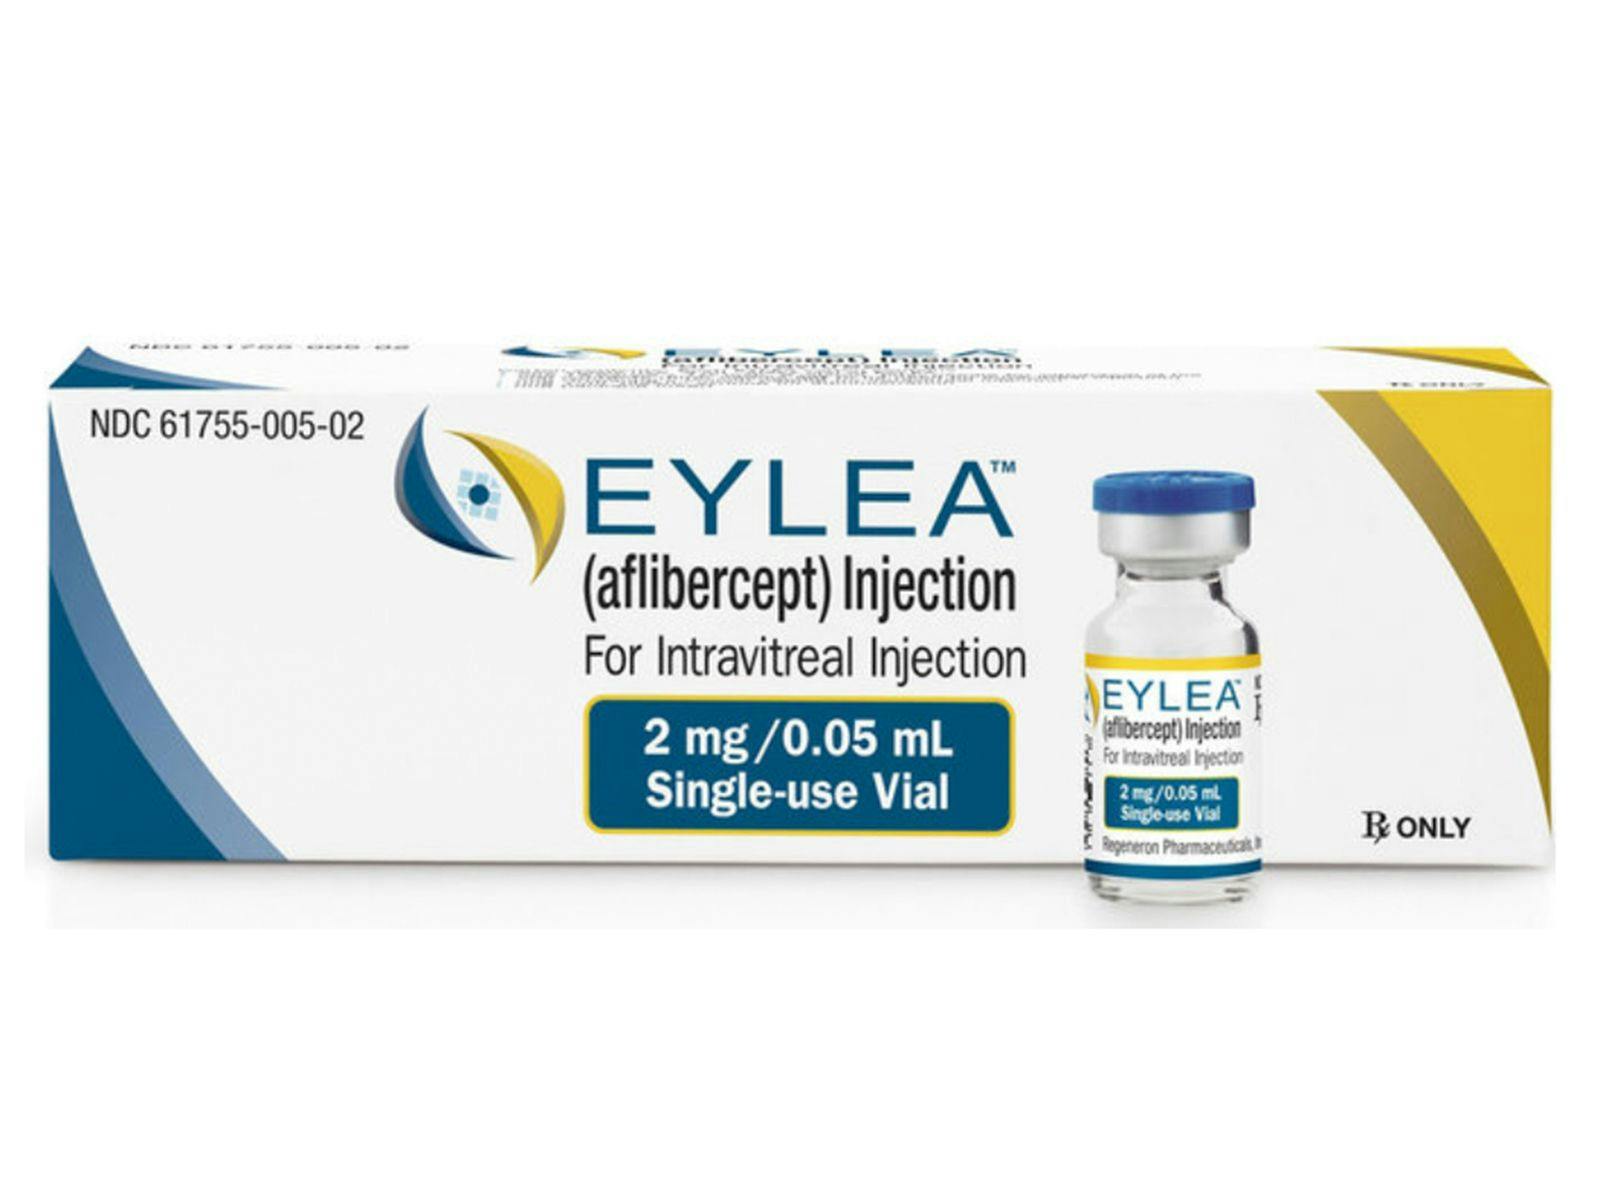 FDA Rejects Higher Dose of Eylea